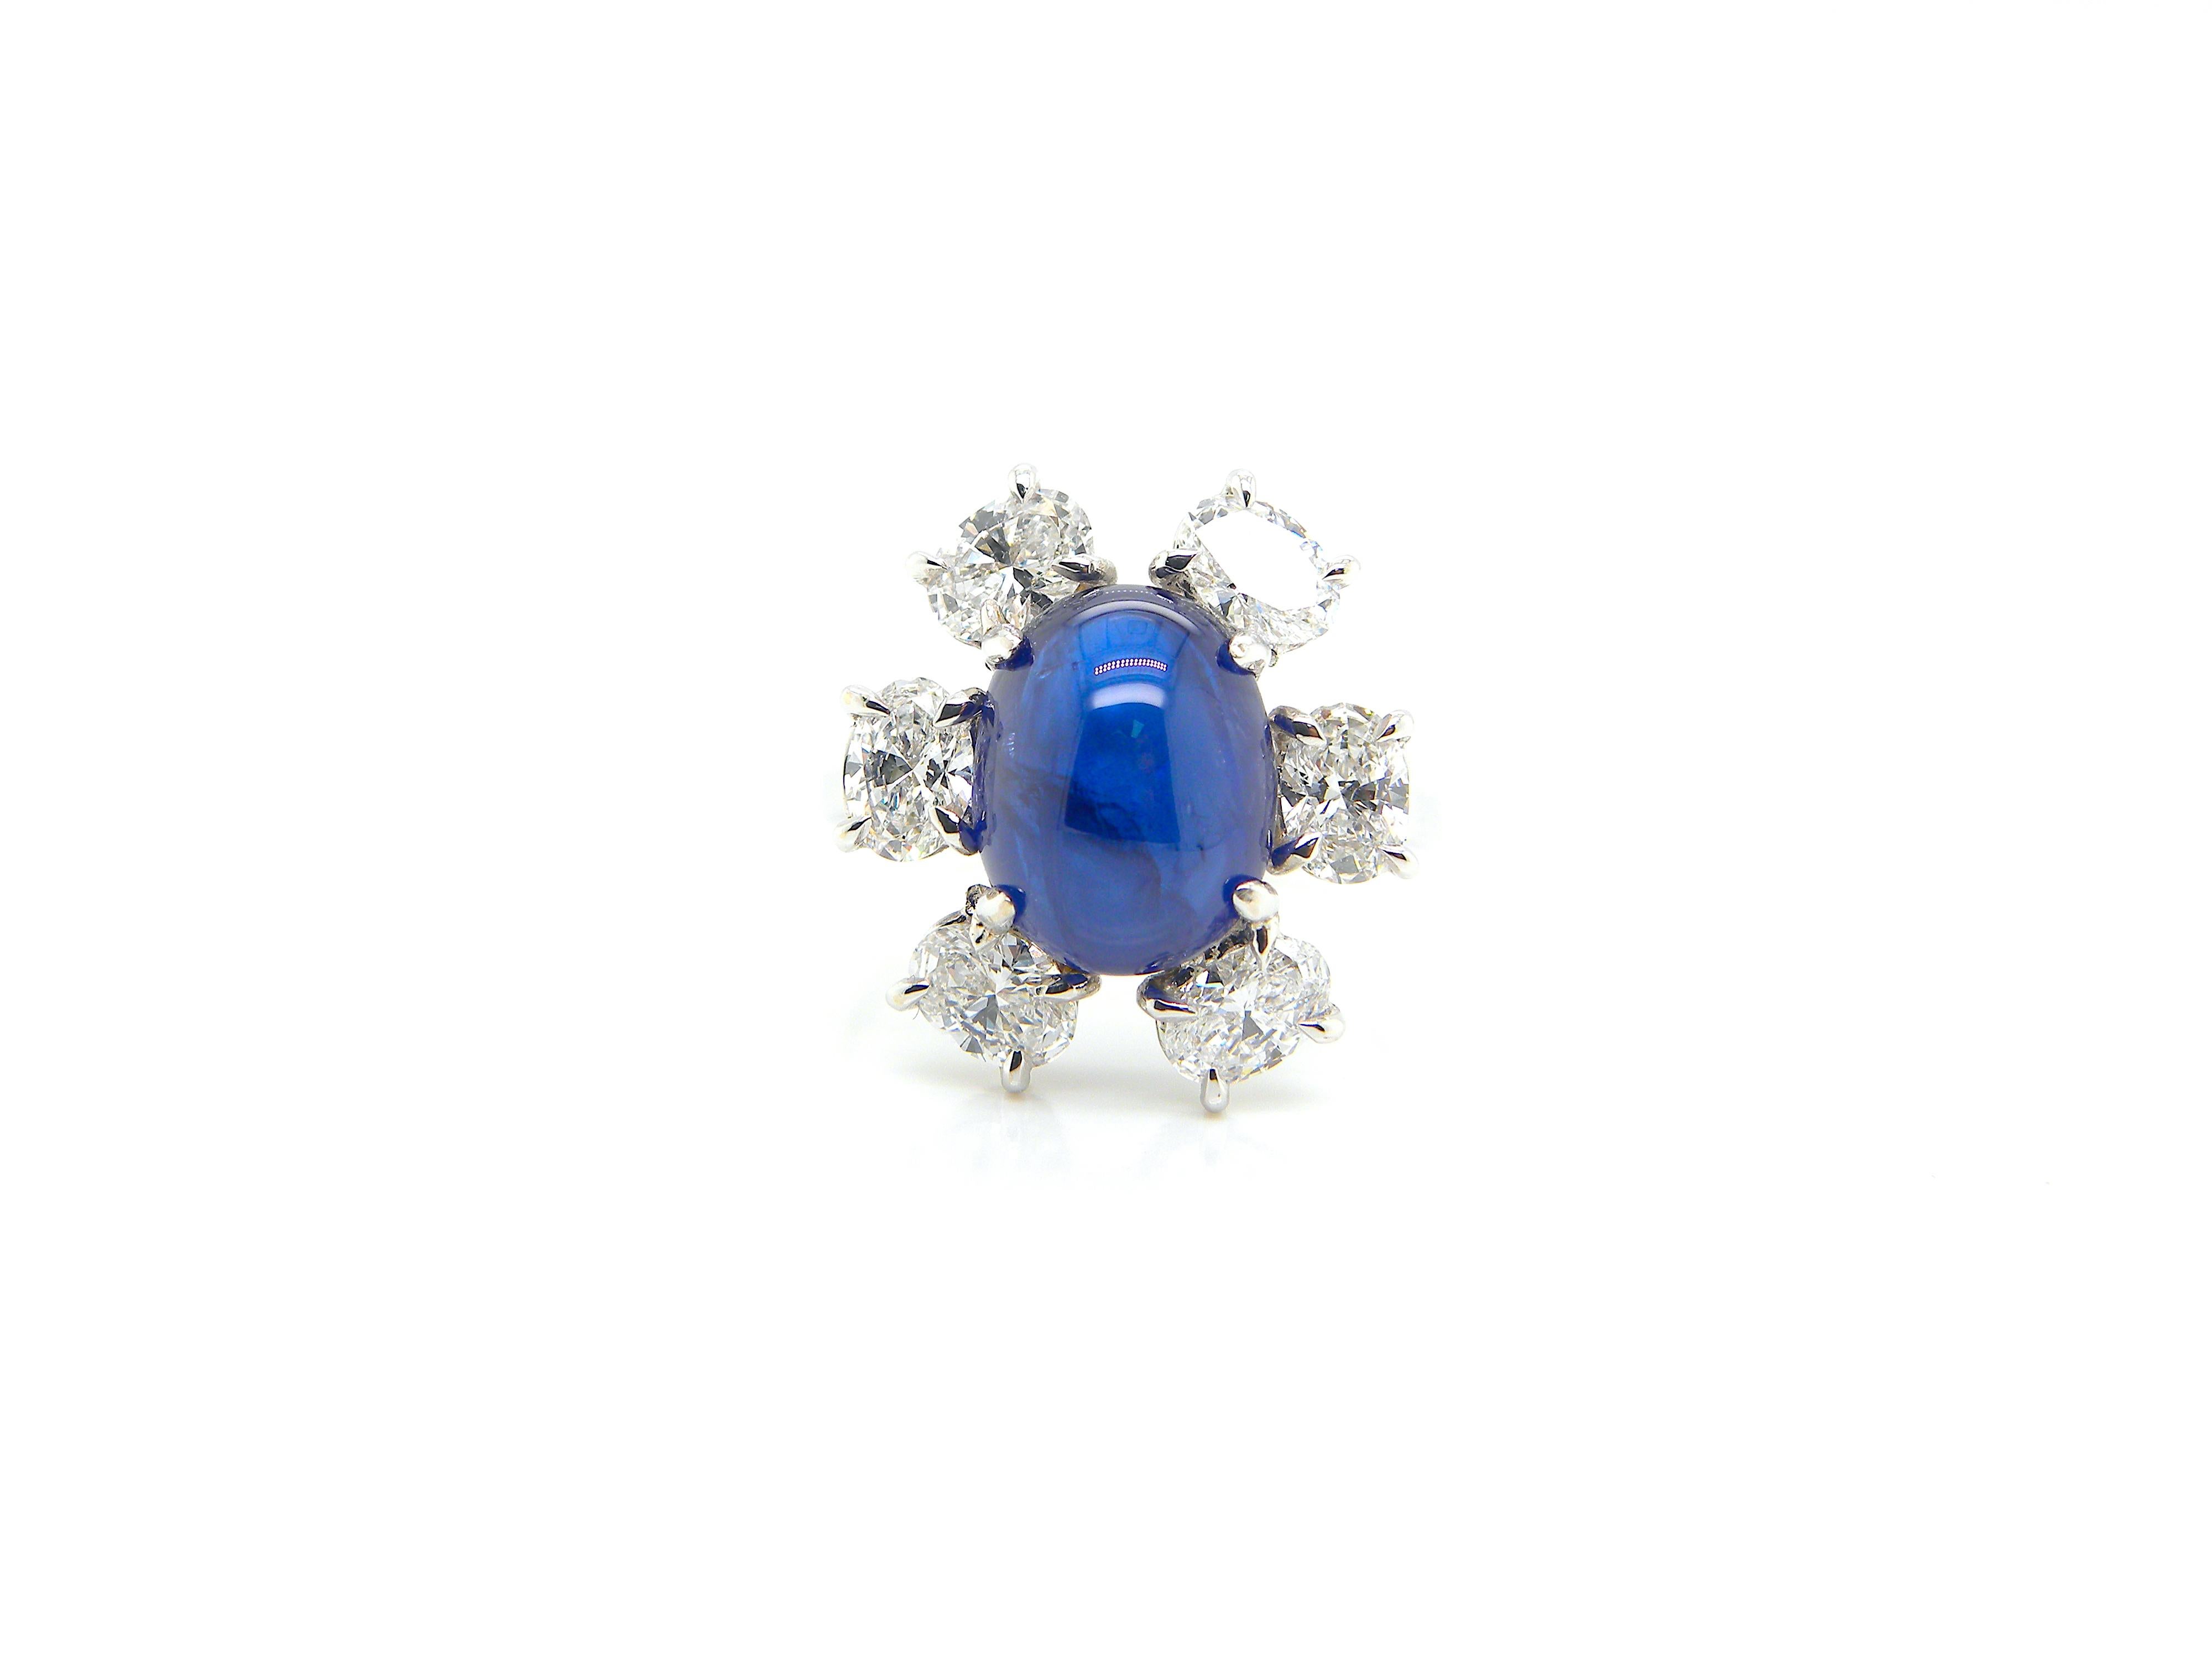 4.69 Carat GRS Certified Burma No Heat Blue Sapphire Cabochon and Diamond Ring:

A rare jewel, it features a 4.69 carat GRS certified Burmese unheated sapphire cabochon surrounded by a flurry of super-white oval diamonds weighing 1.50 carat. The